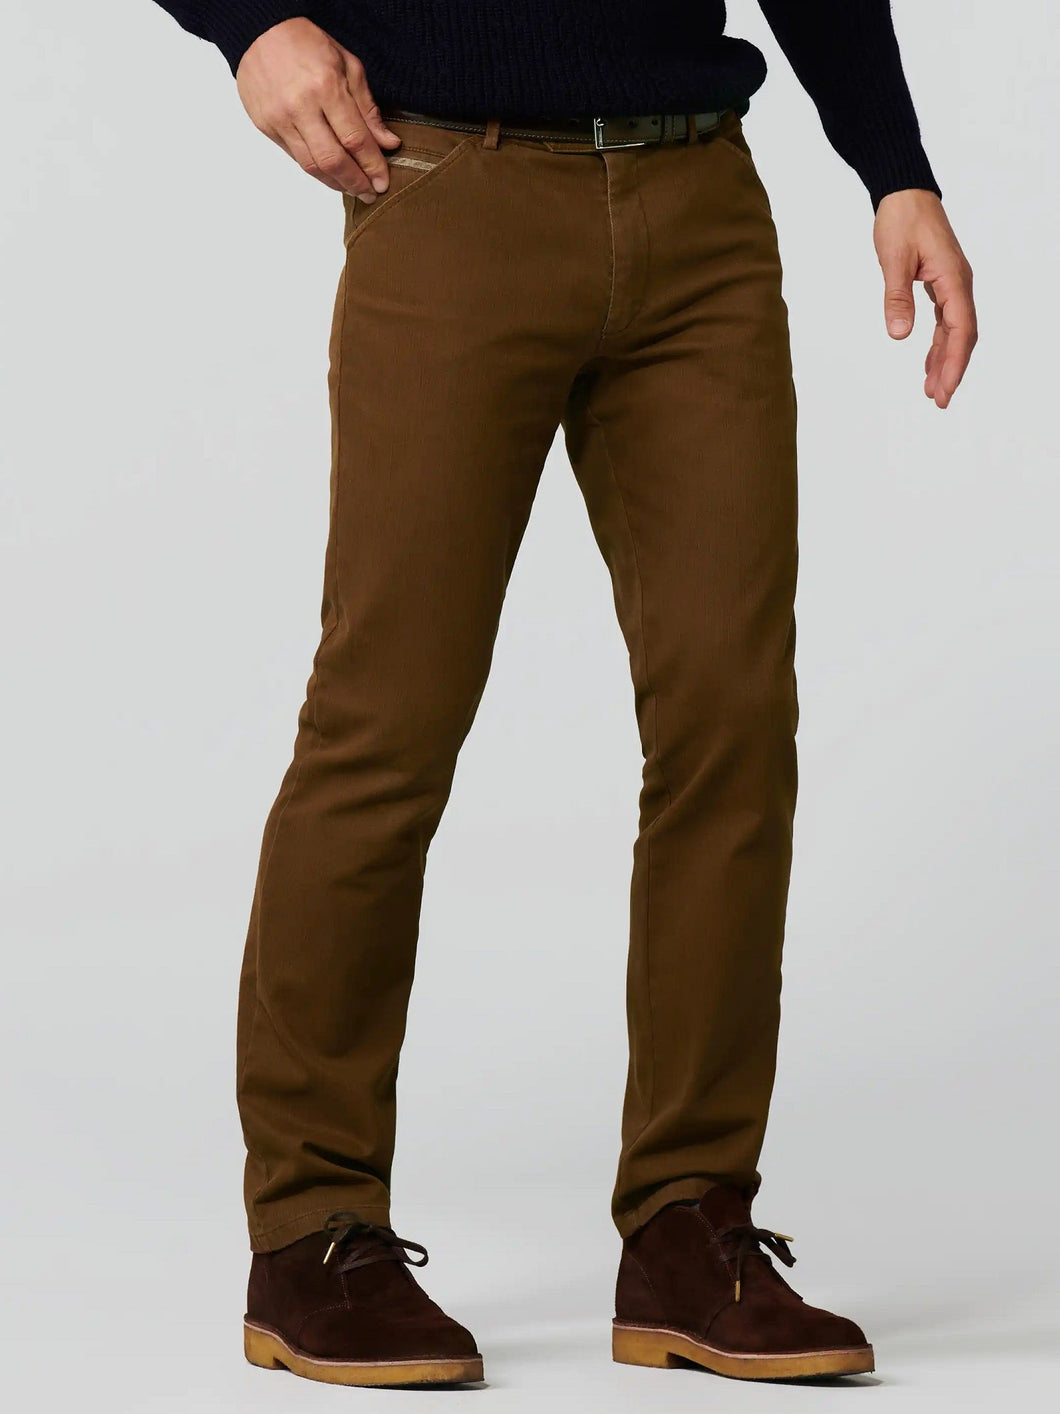 40% OFF - MEYER Trousers - Chicago 5606 Micro Structure Cotton Chinos - Caramel - Sizes: 32 REG, 34 LONG & 38 SHORT